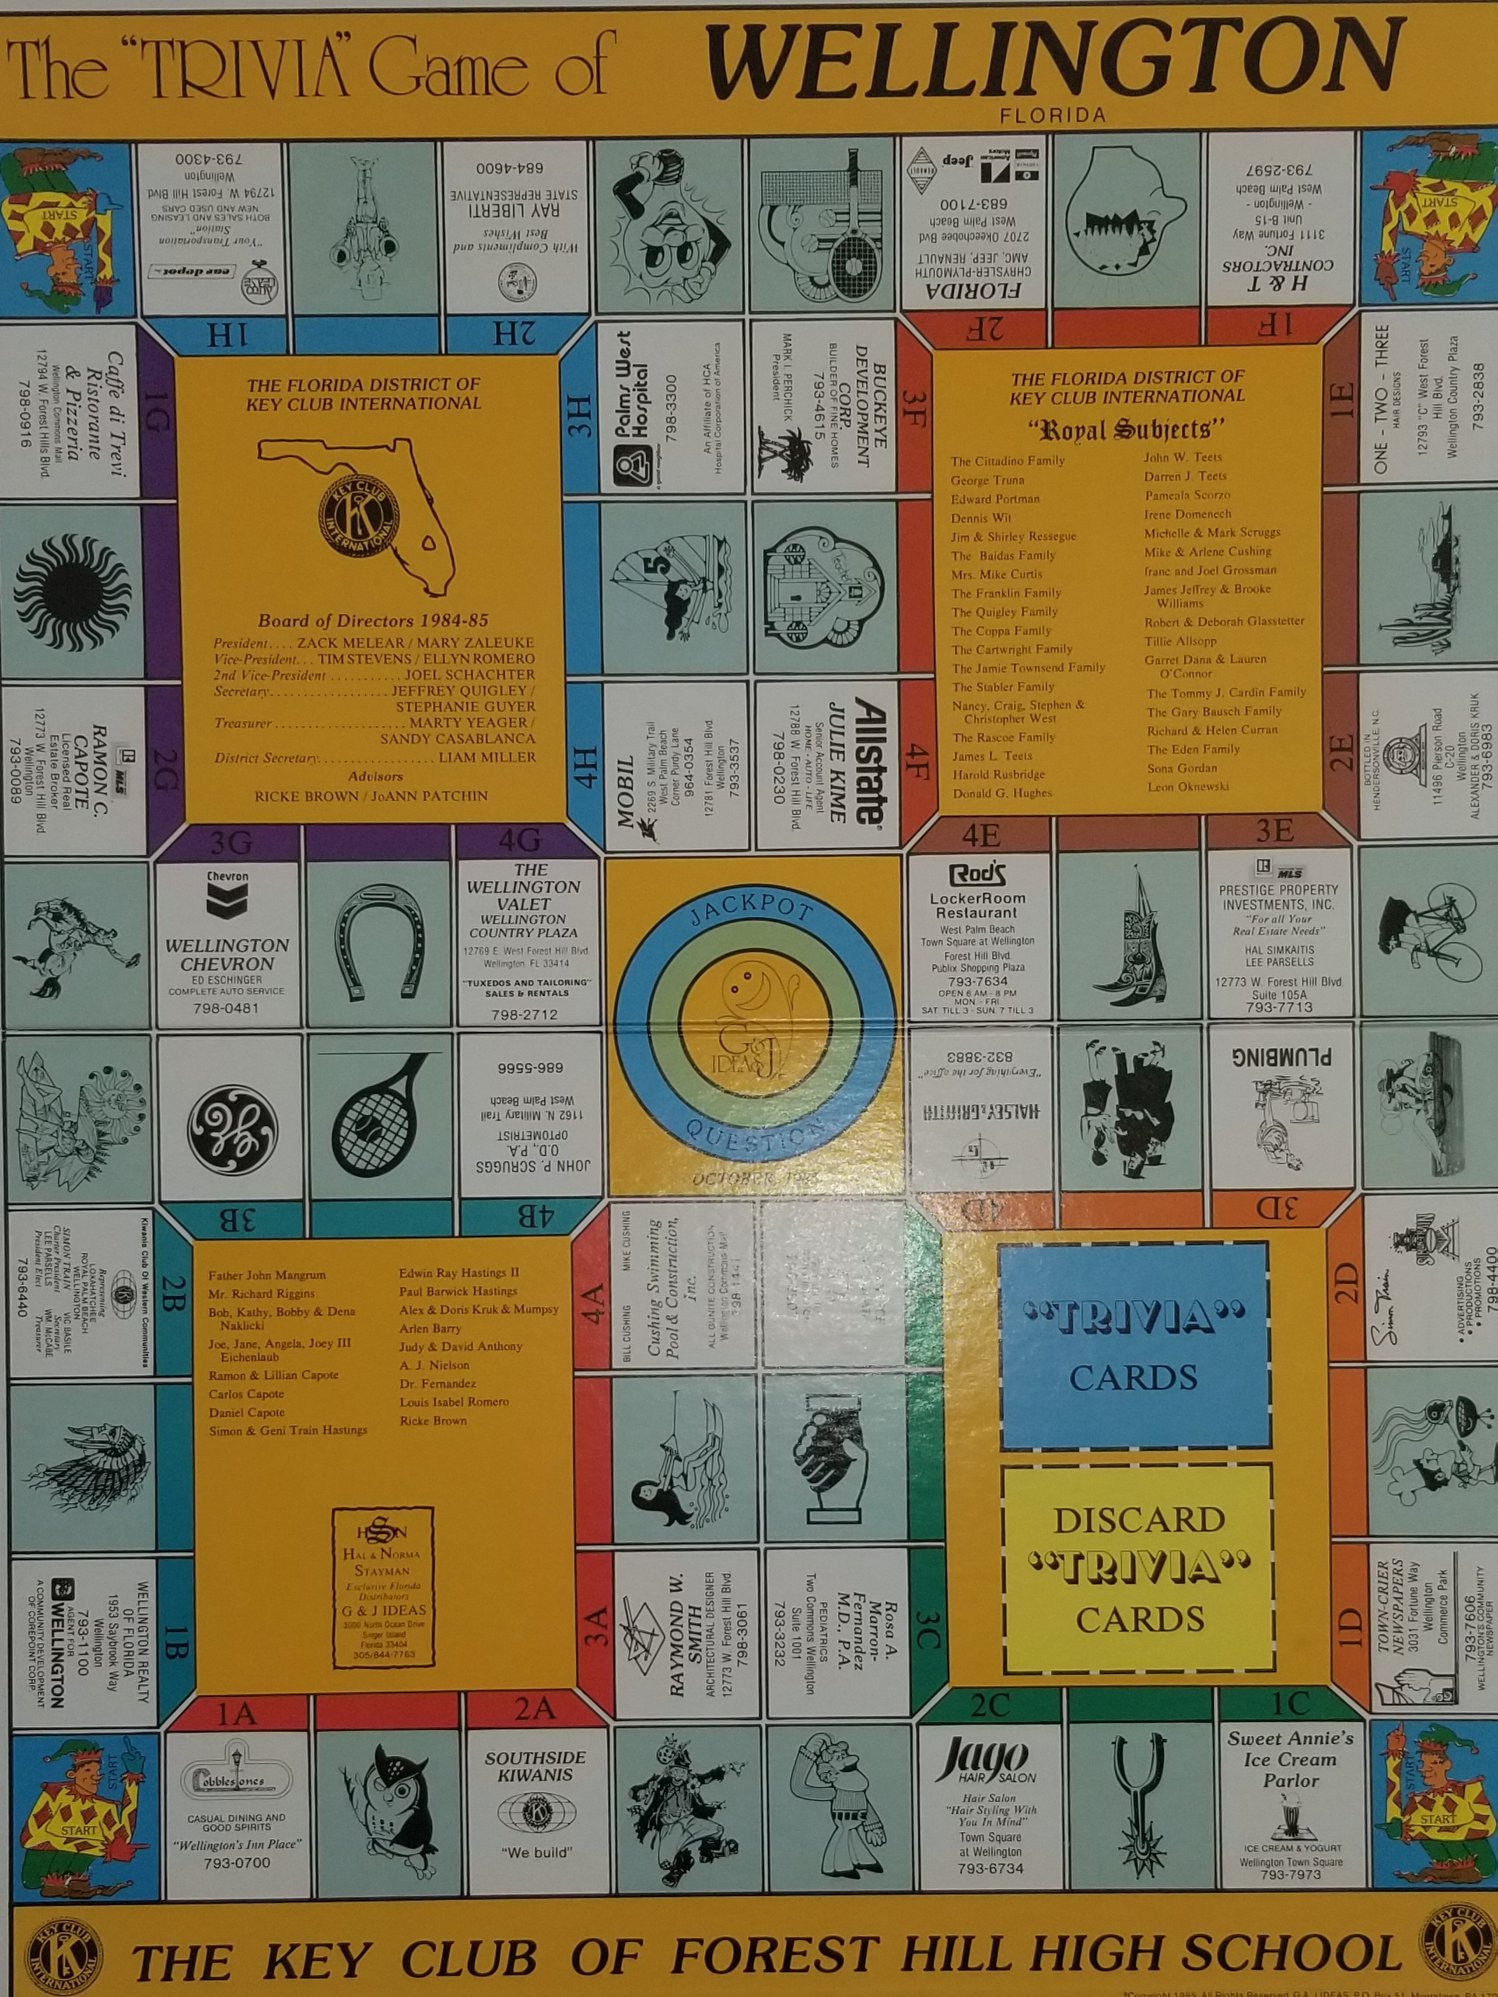 Trivia Game of Wellington created in 1985 by The Key Club of Forest Hill High School